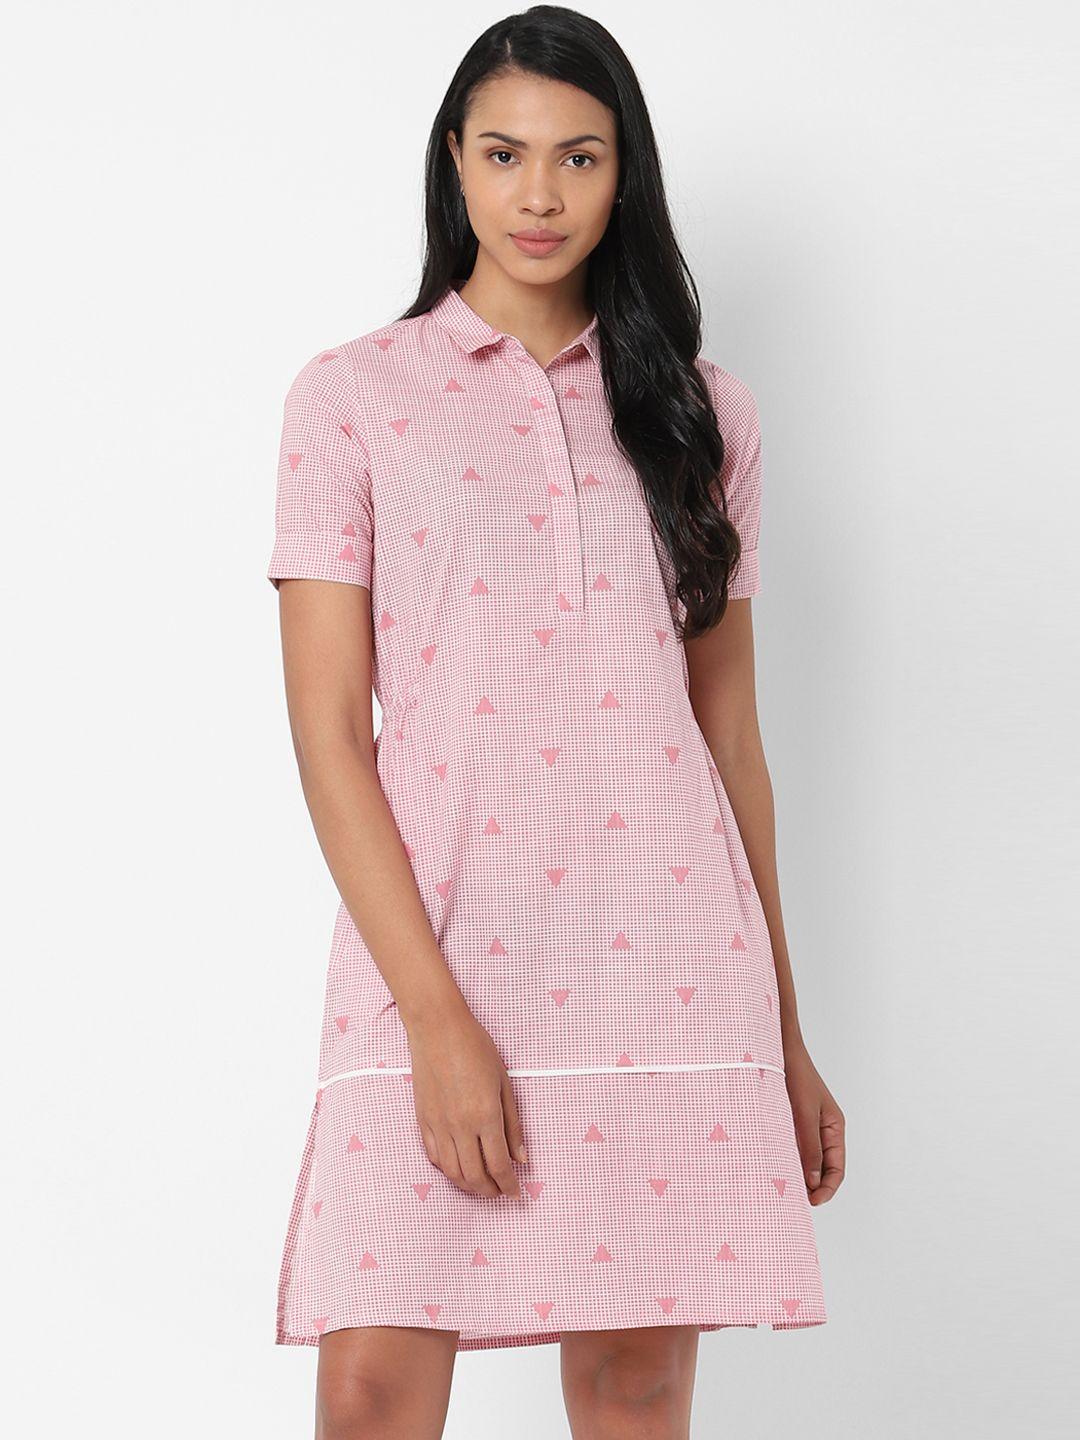 allen-solly-woman-pink-&-white-checked-a-line-dress